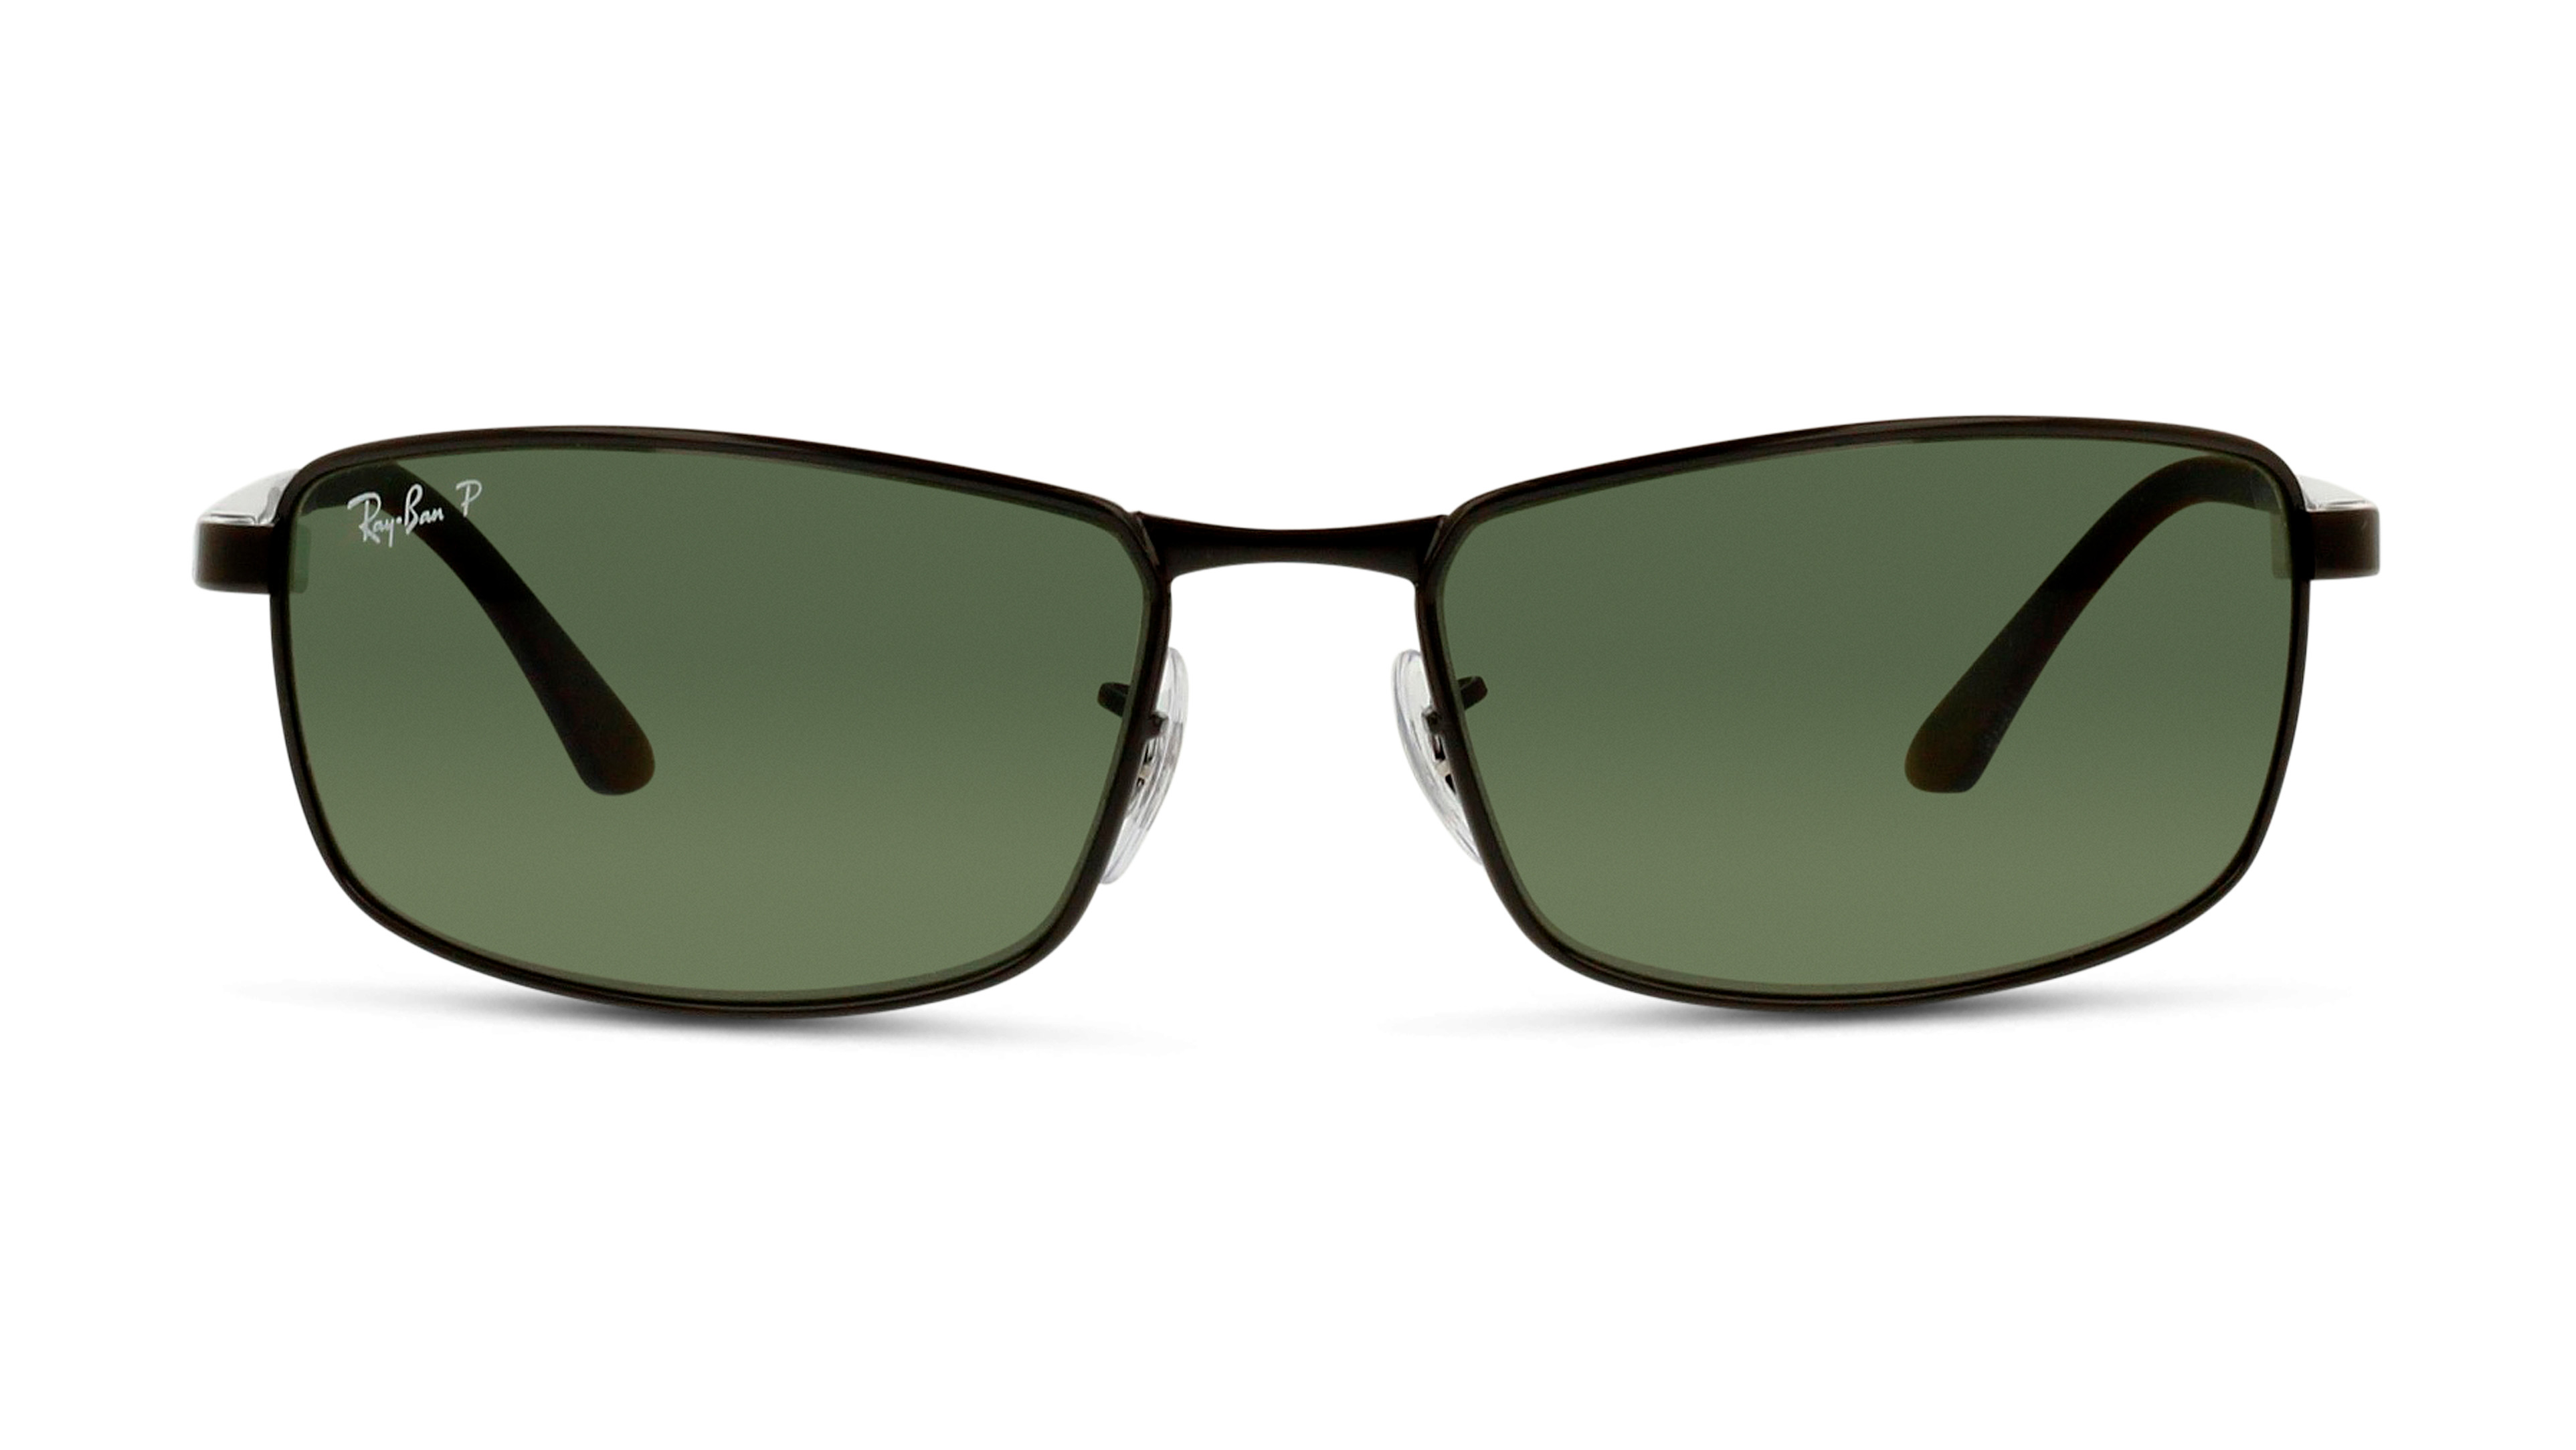 [products.image.front] Ray-Ban N/A 0RB3498 002/9A Sonnenbrille